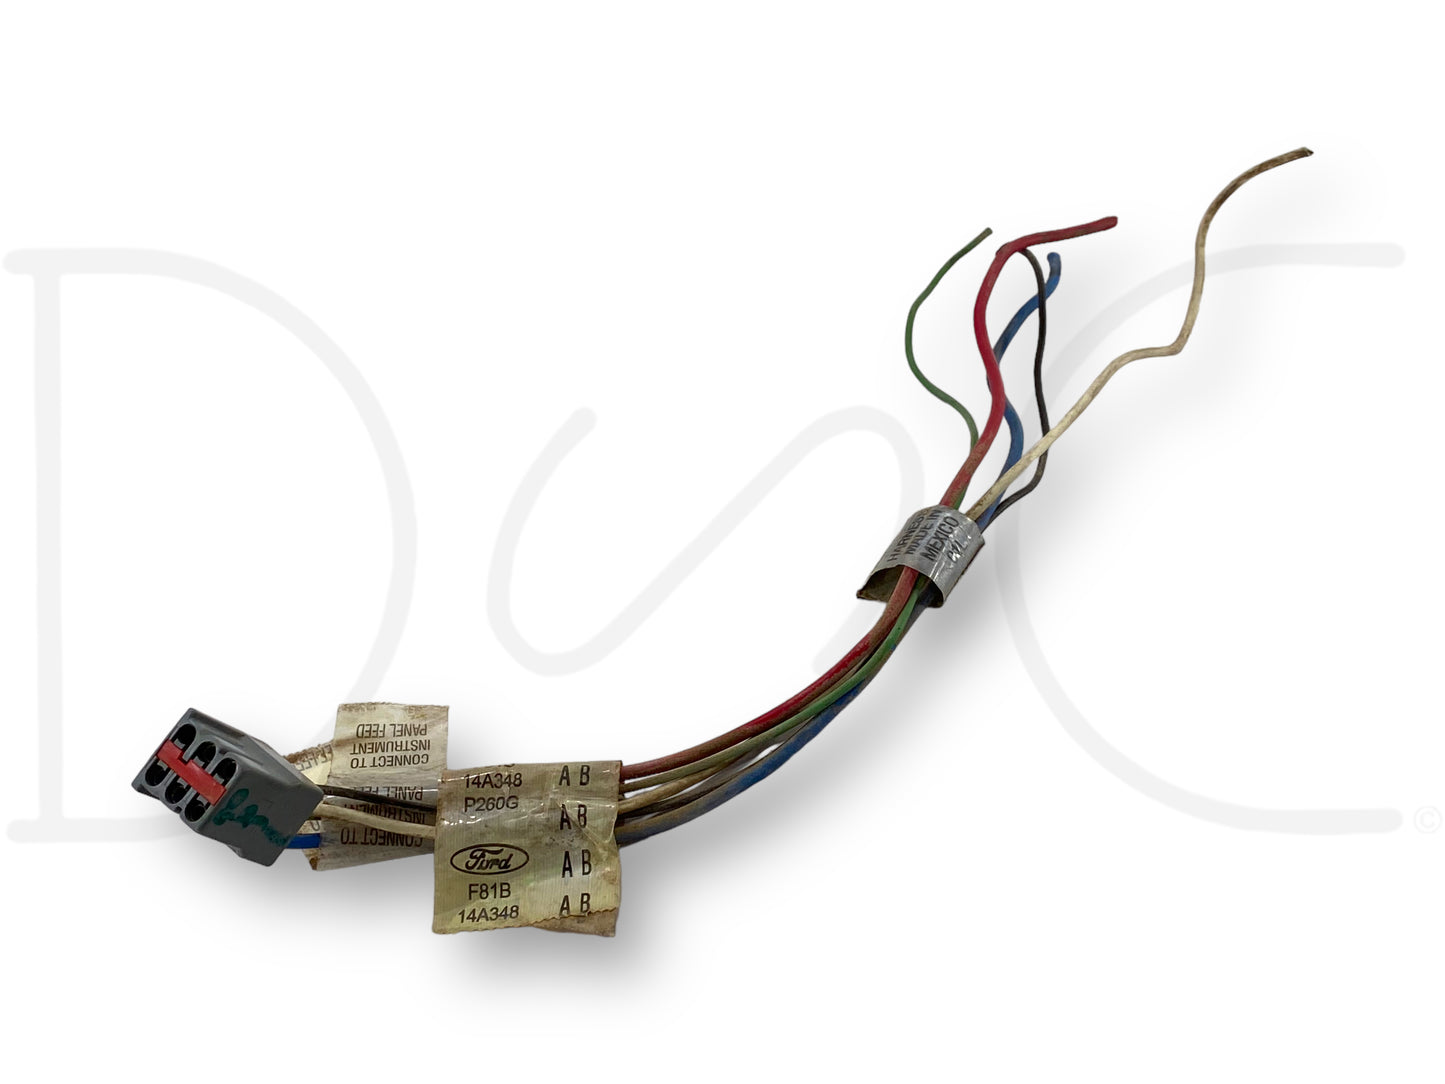 99-04 Ford F350 Trailer Brake Controller Wiring Harness OE F81B-14A348-P260G Ab